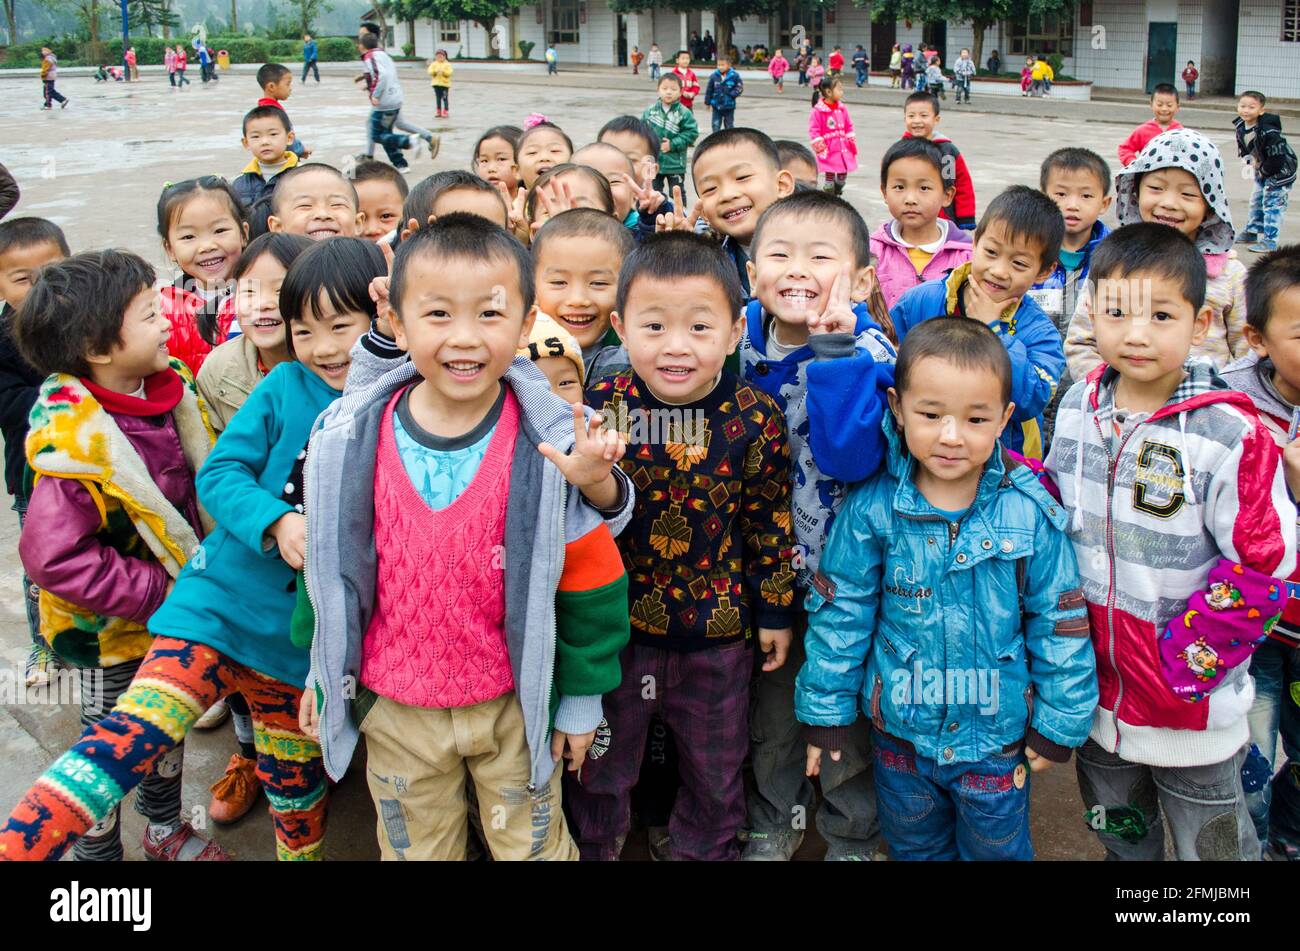 This rural school was severely hit by the 2008 Sichuan earthquake. Our school helped raise funds to help rebuild one of the buildings. Stock Photo